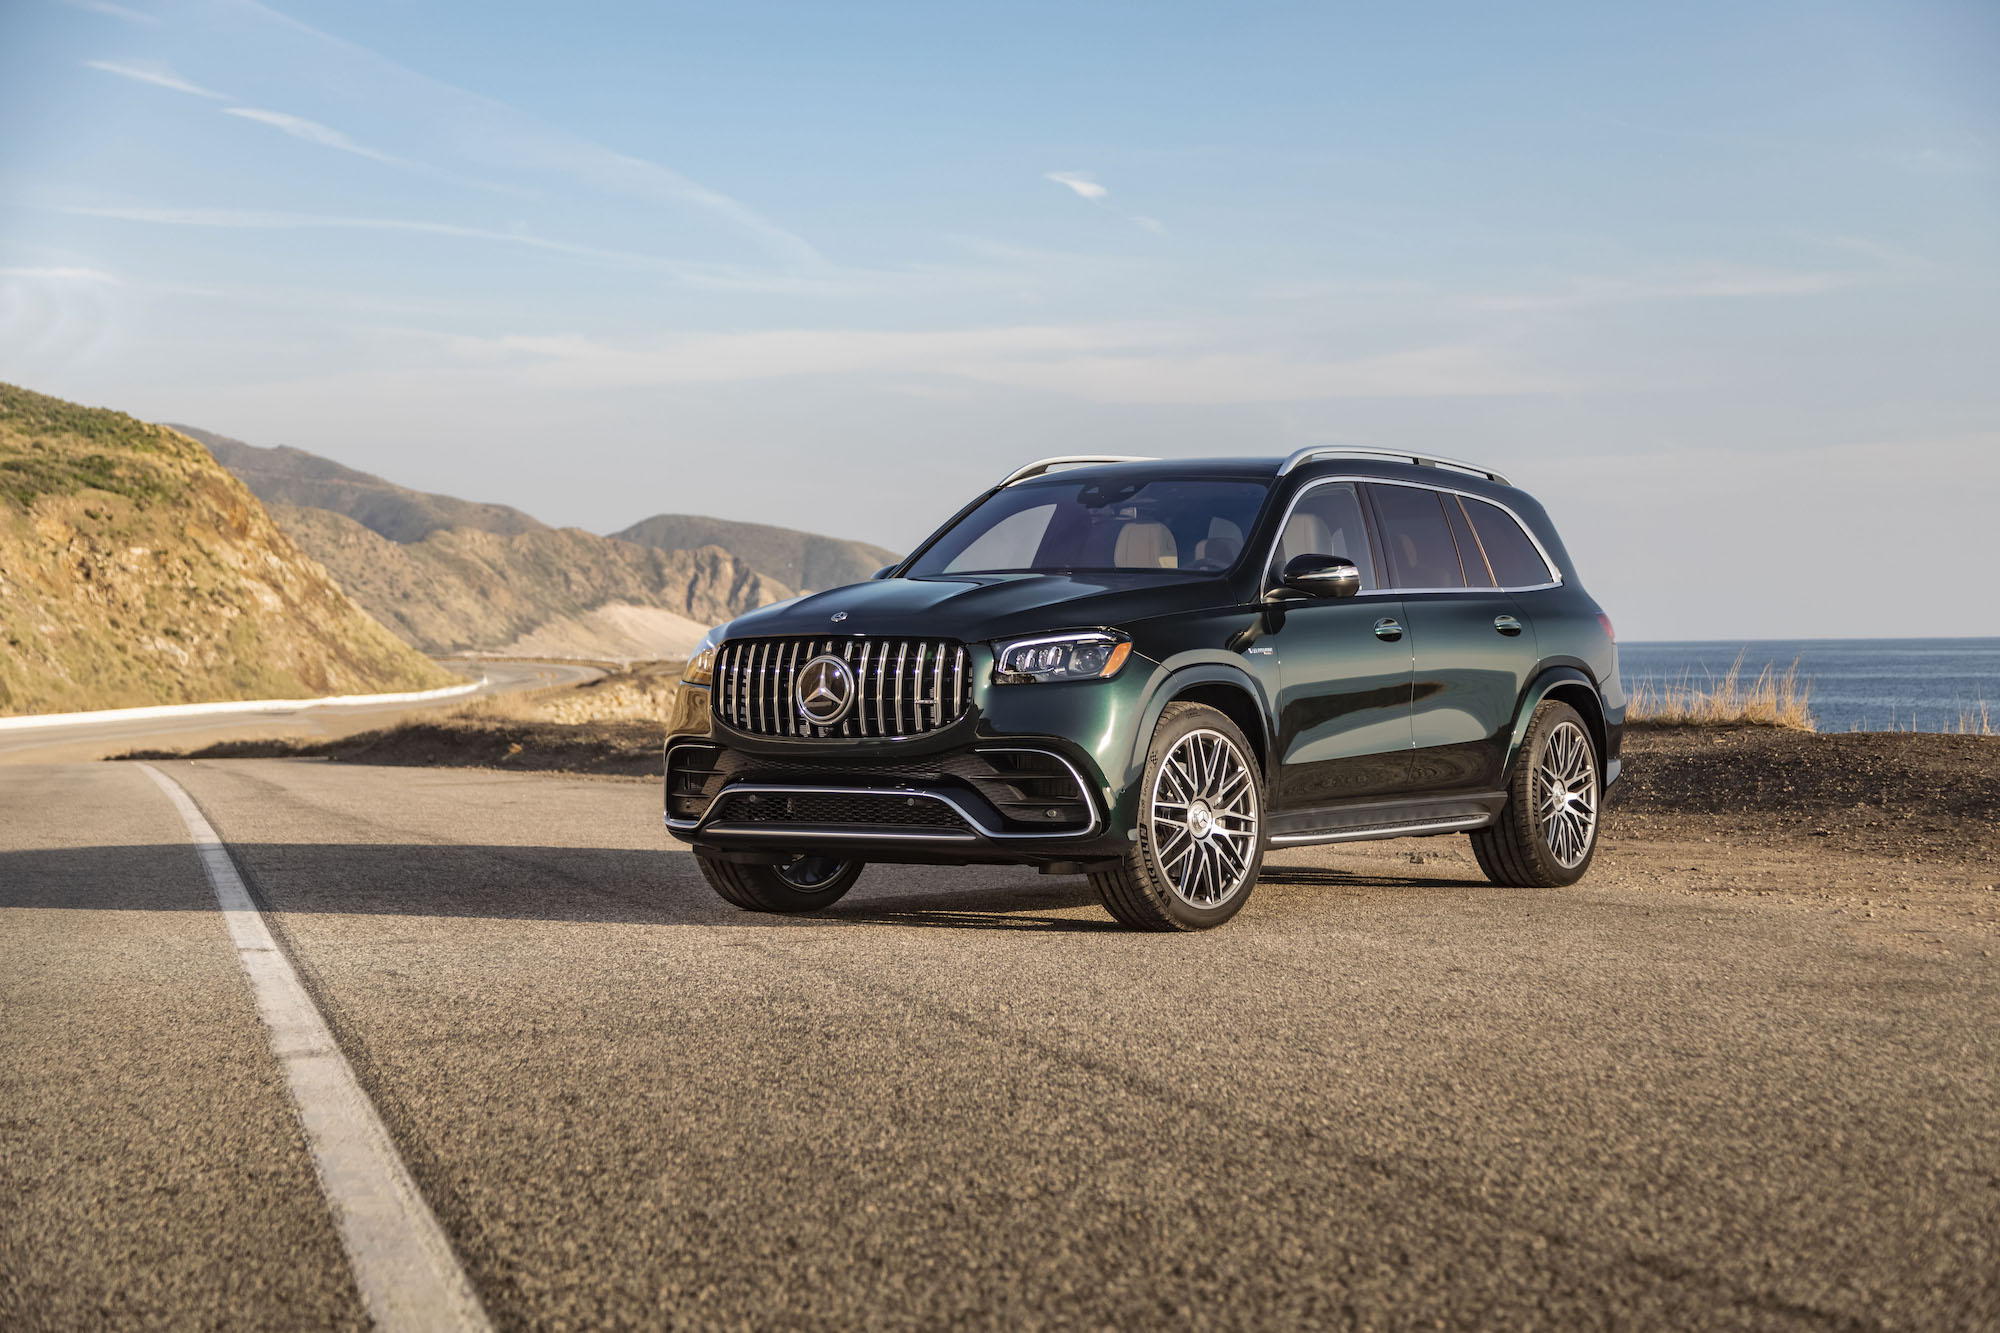 A dark-green 2021 Mercedes-AMG GLS 63 parked on a paved road with blue sky and mountains in the background